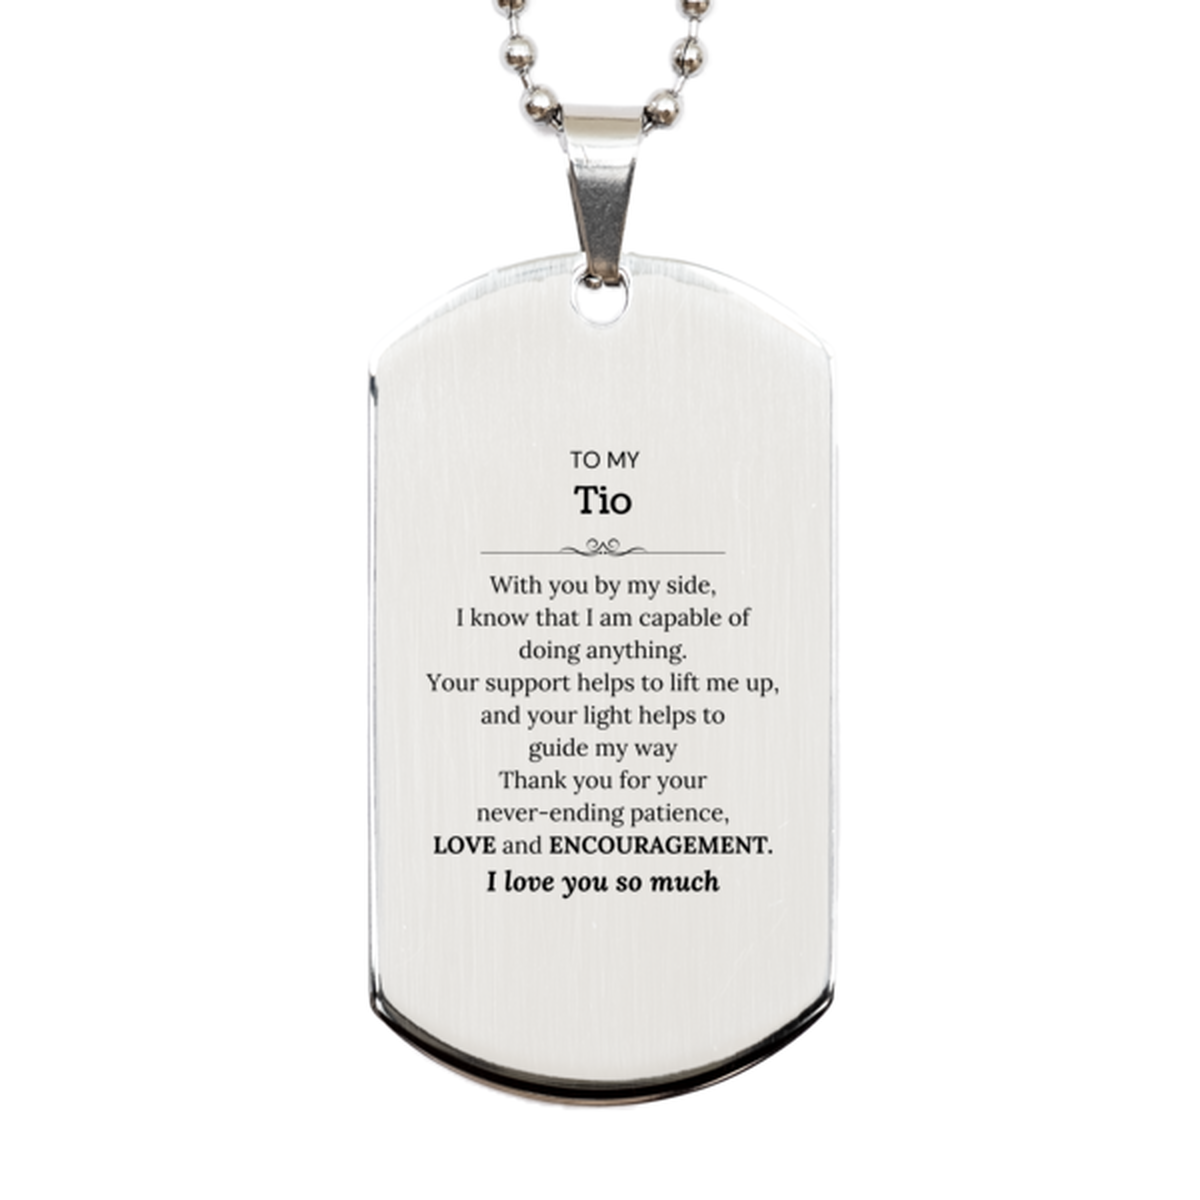 Appreciation Tio Silver Dog Tag Gifts, To My Tio Birthday Christmas Wedding Keepsake Gifts for Tio With you by my side, I know that I am capable of doing anything. I love you so much